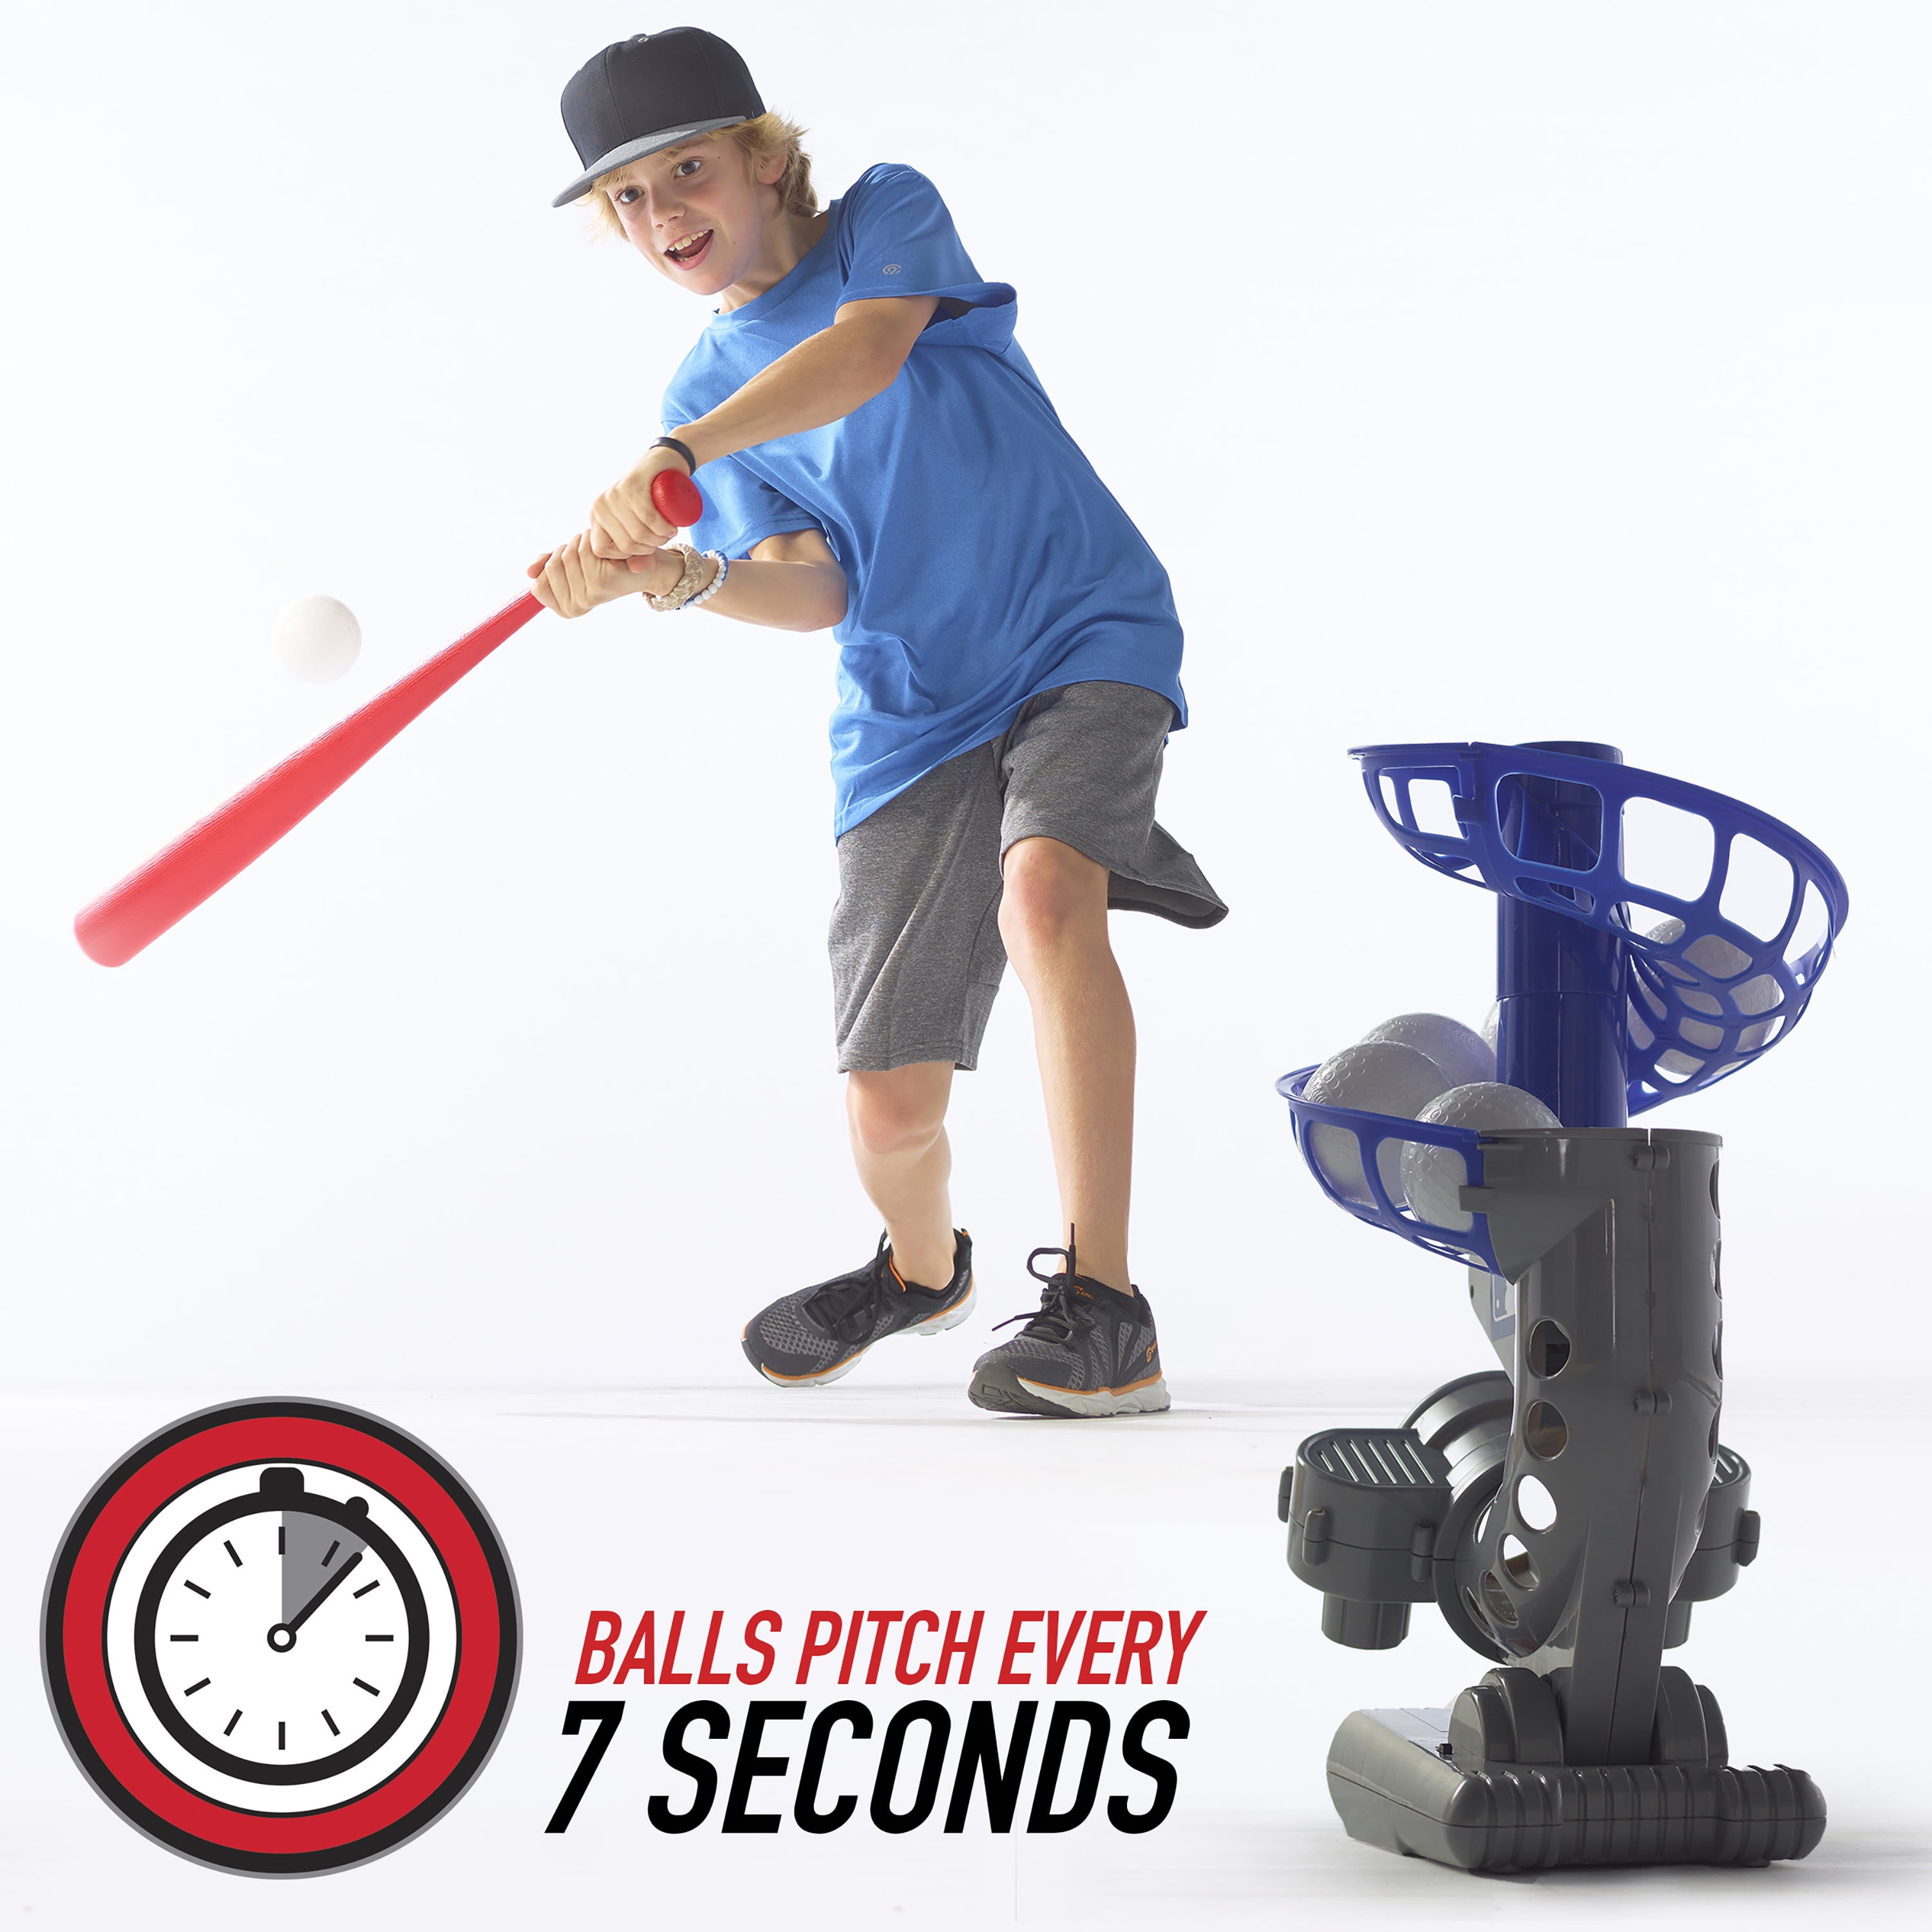 Franklin Sports MLB Youth Pitching Machine for sale online  eBay